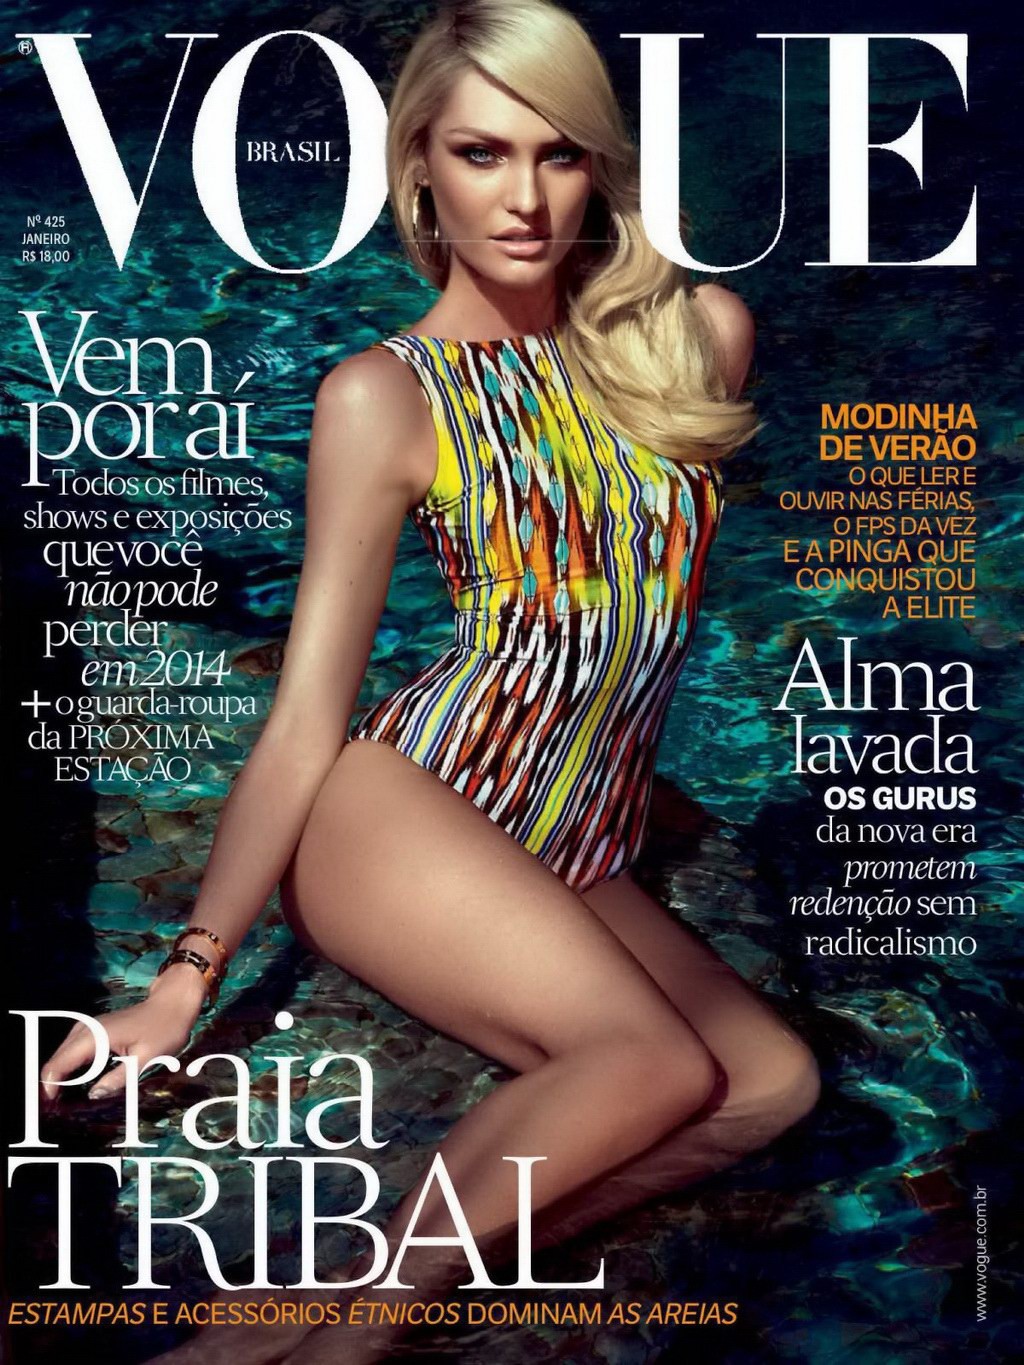 Candice Swanepoel looking very hot in Vogue Magazine Brazil photoshoot #75208195